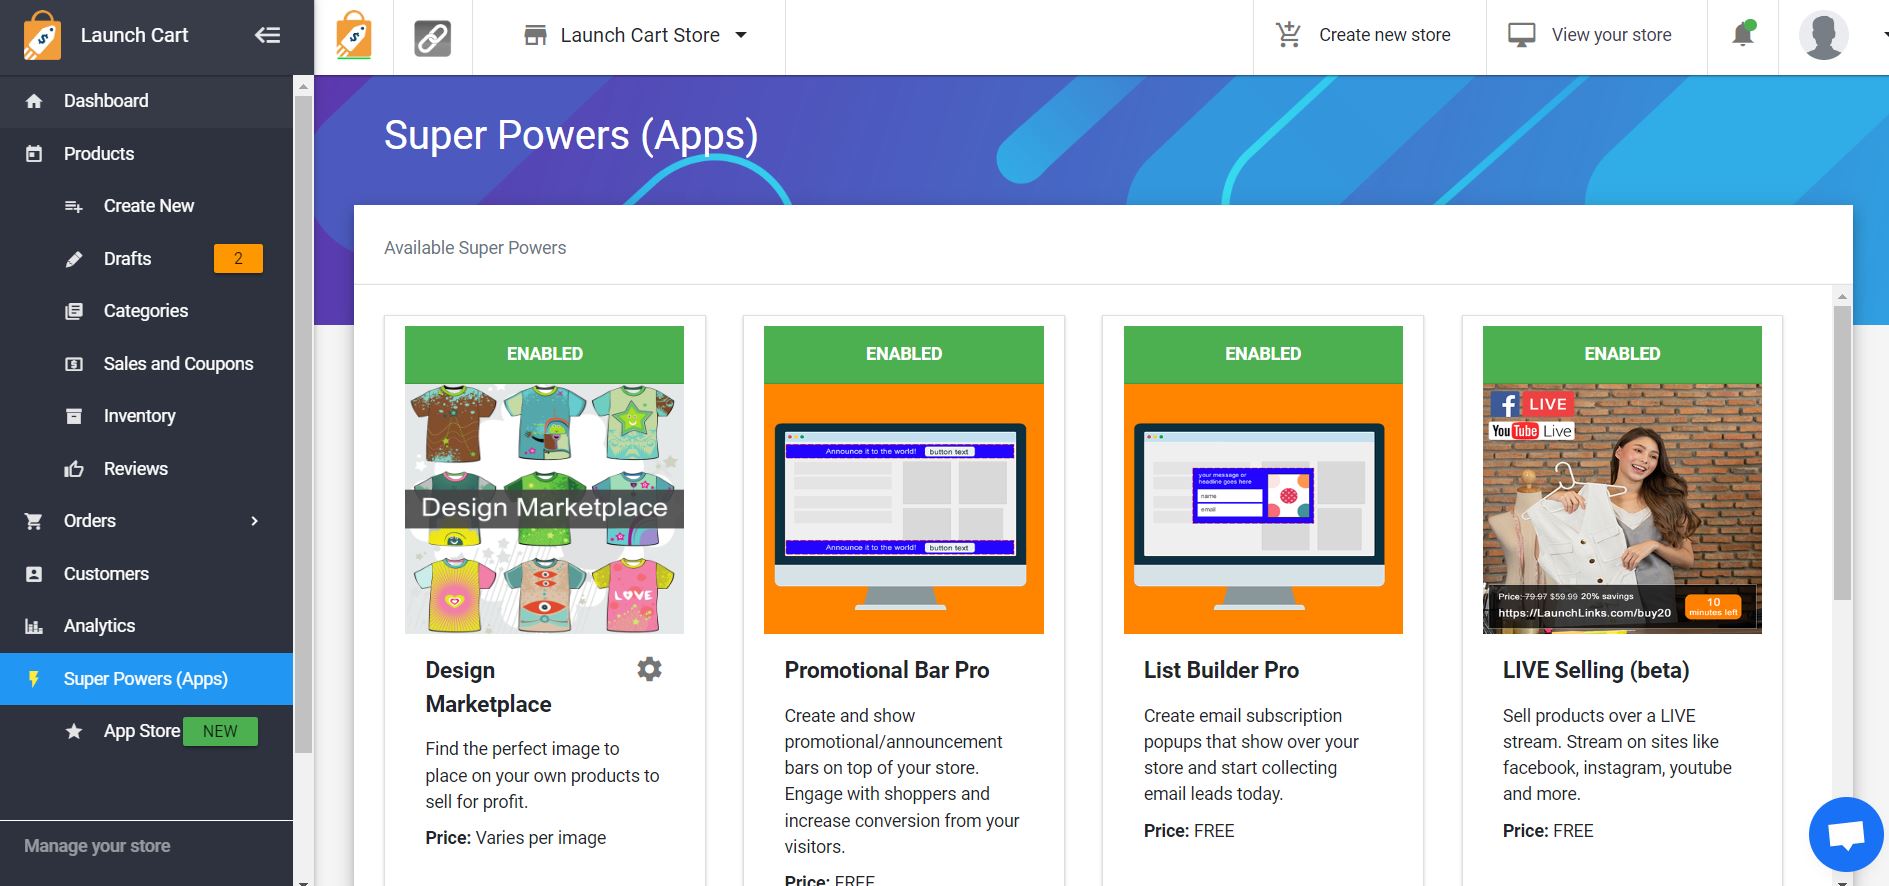 Launch Cart is the only ecommerce platform with advanced super powers built in natively.